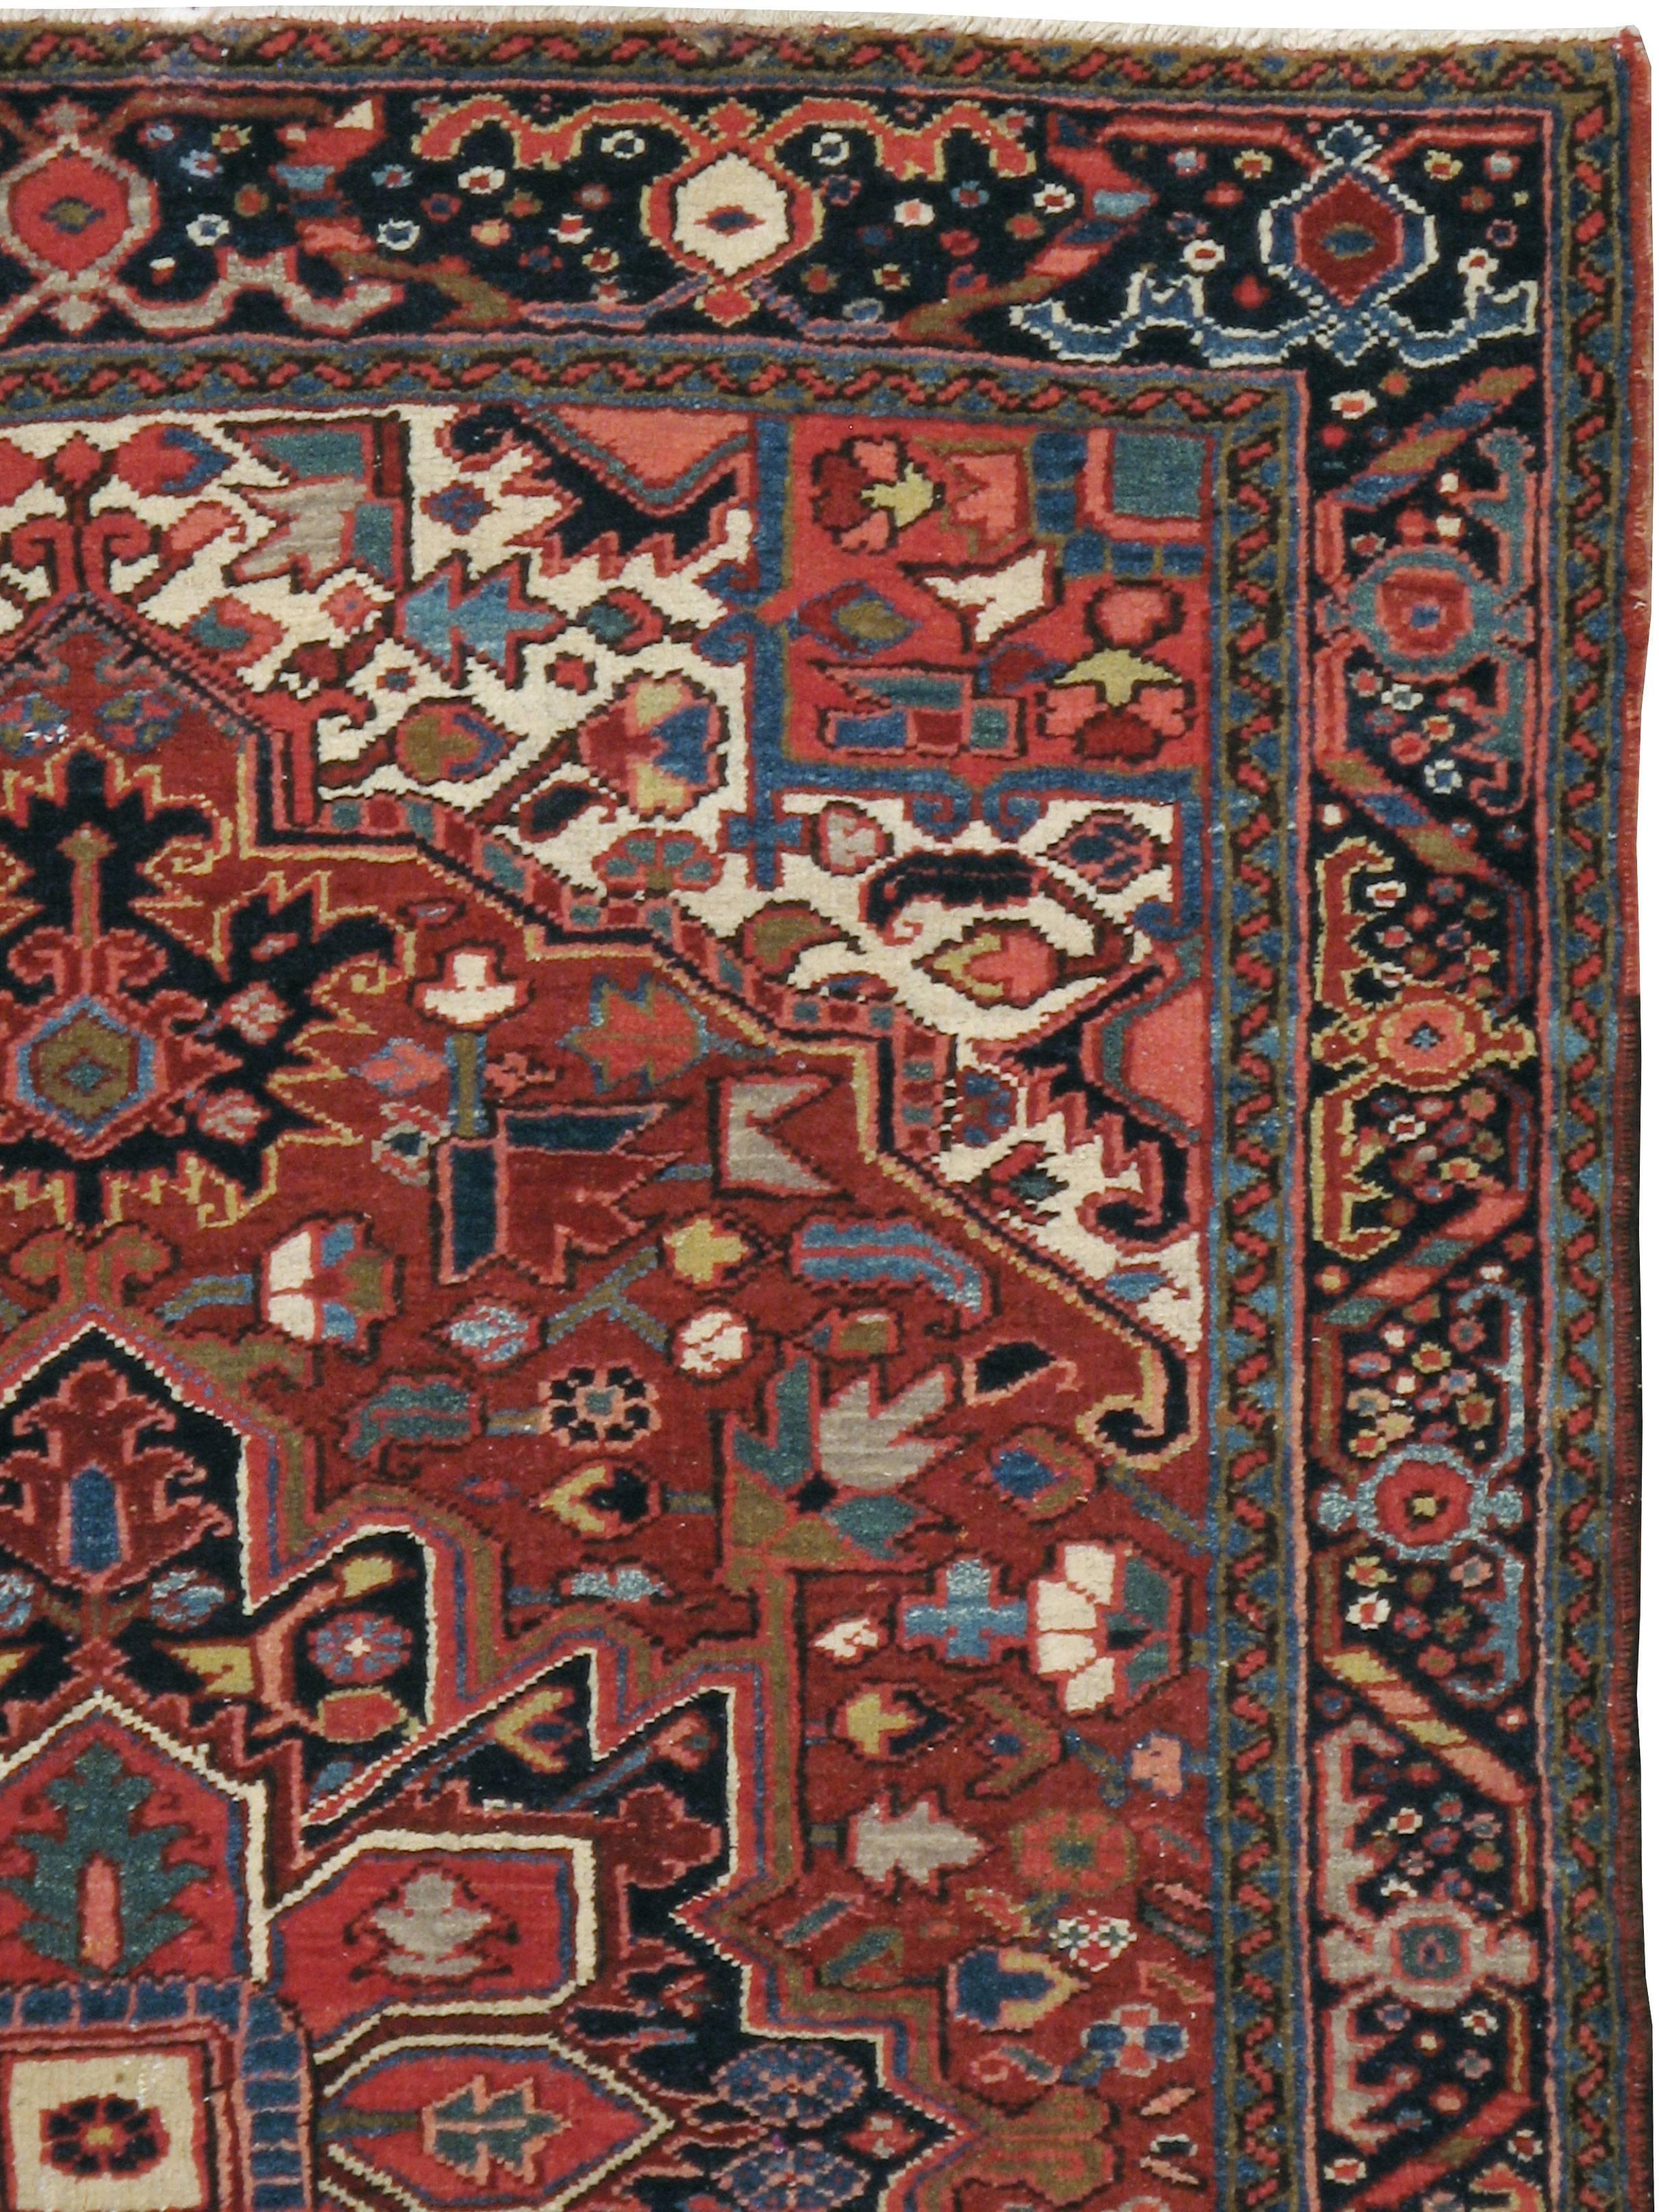 A vintage Persian Heriz rug from the mid-20th century.